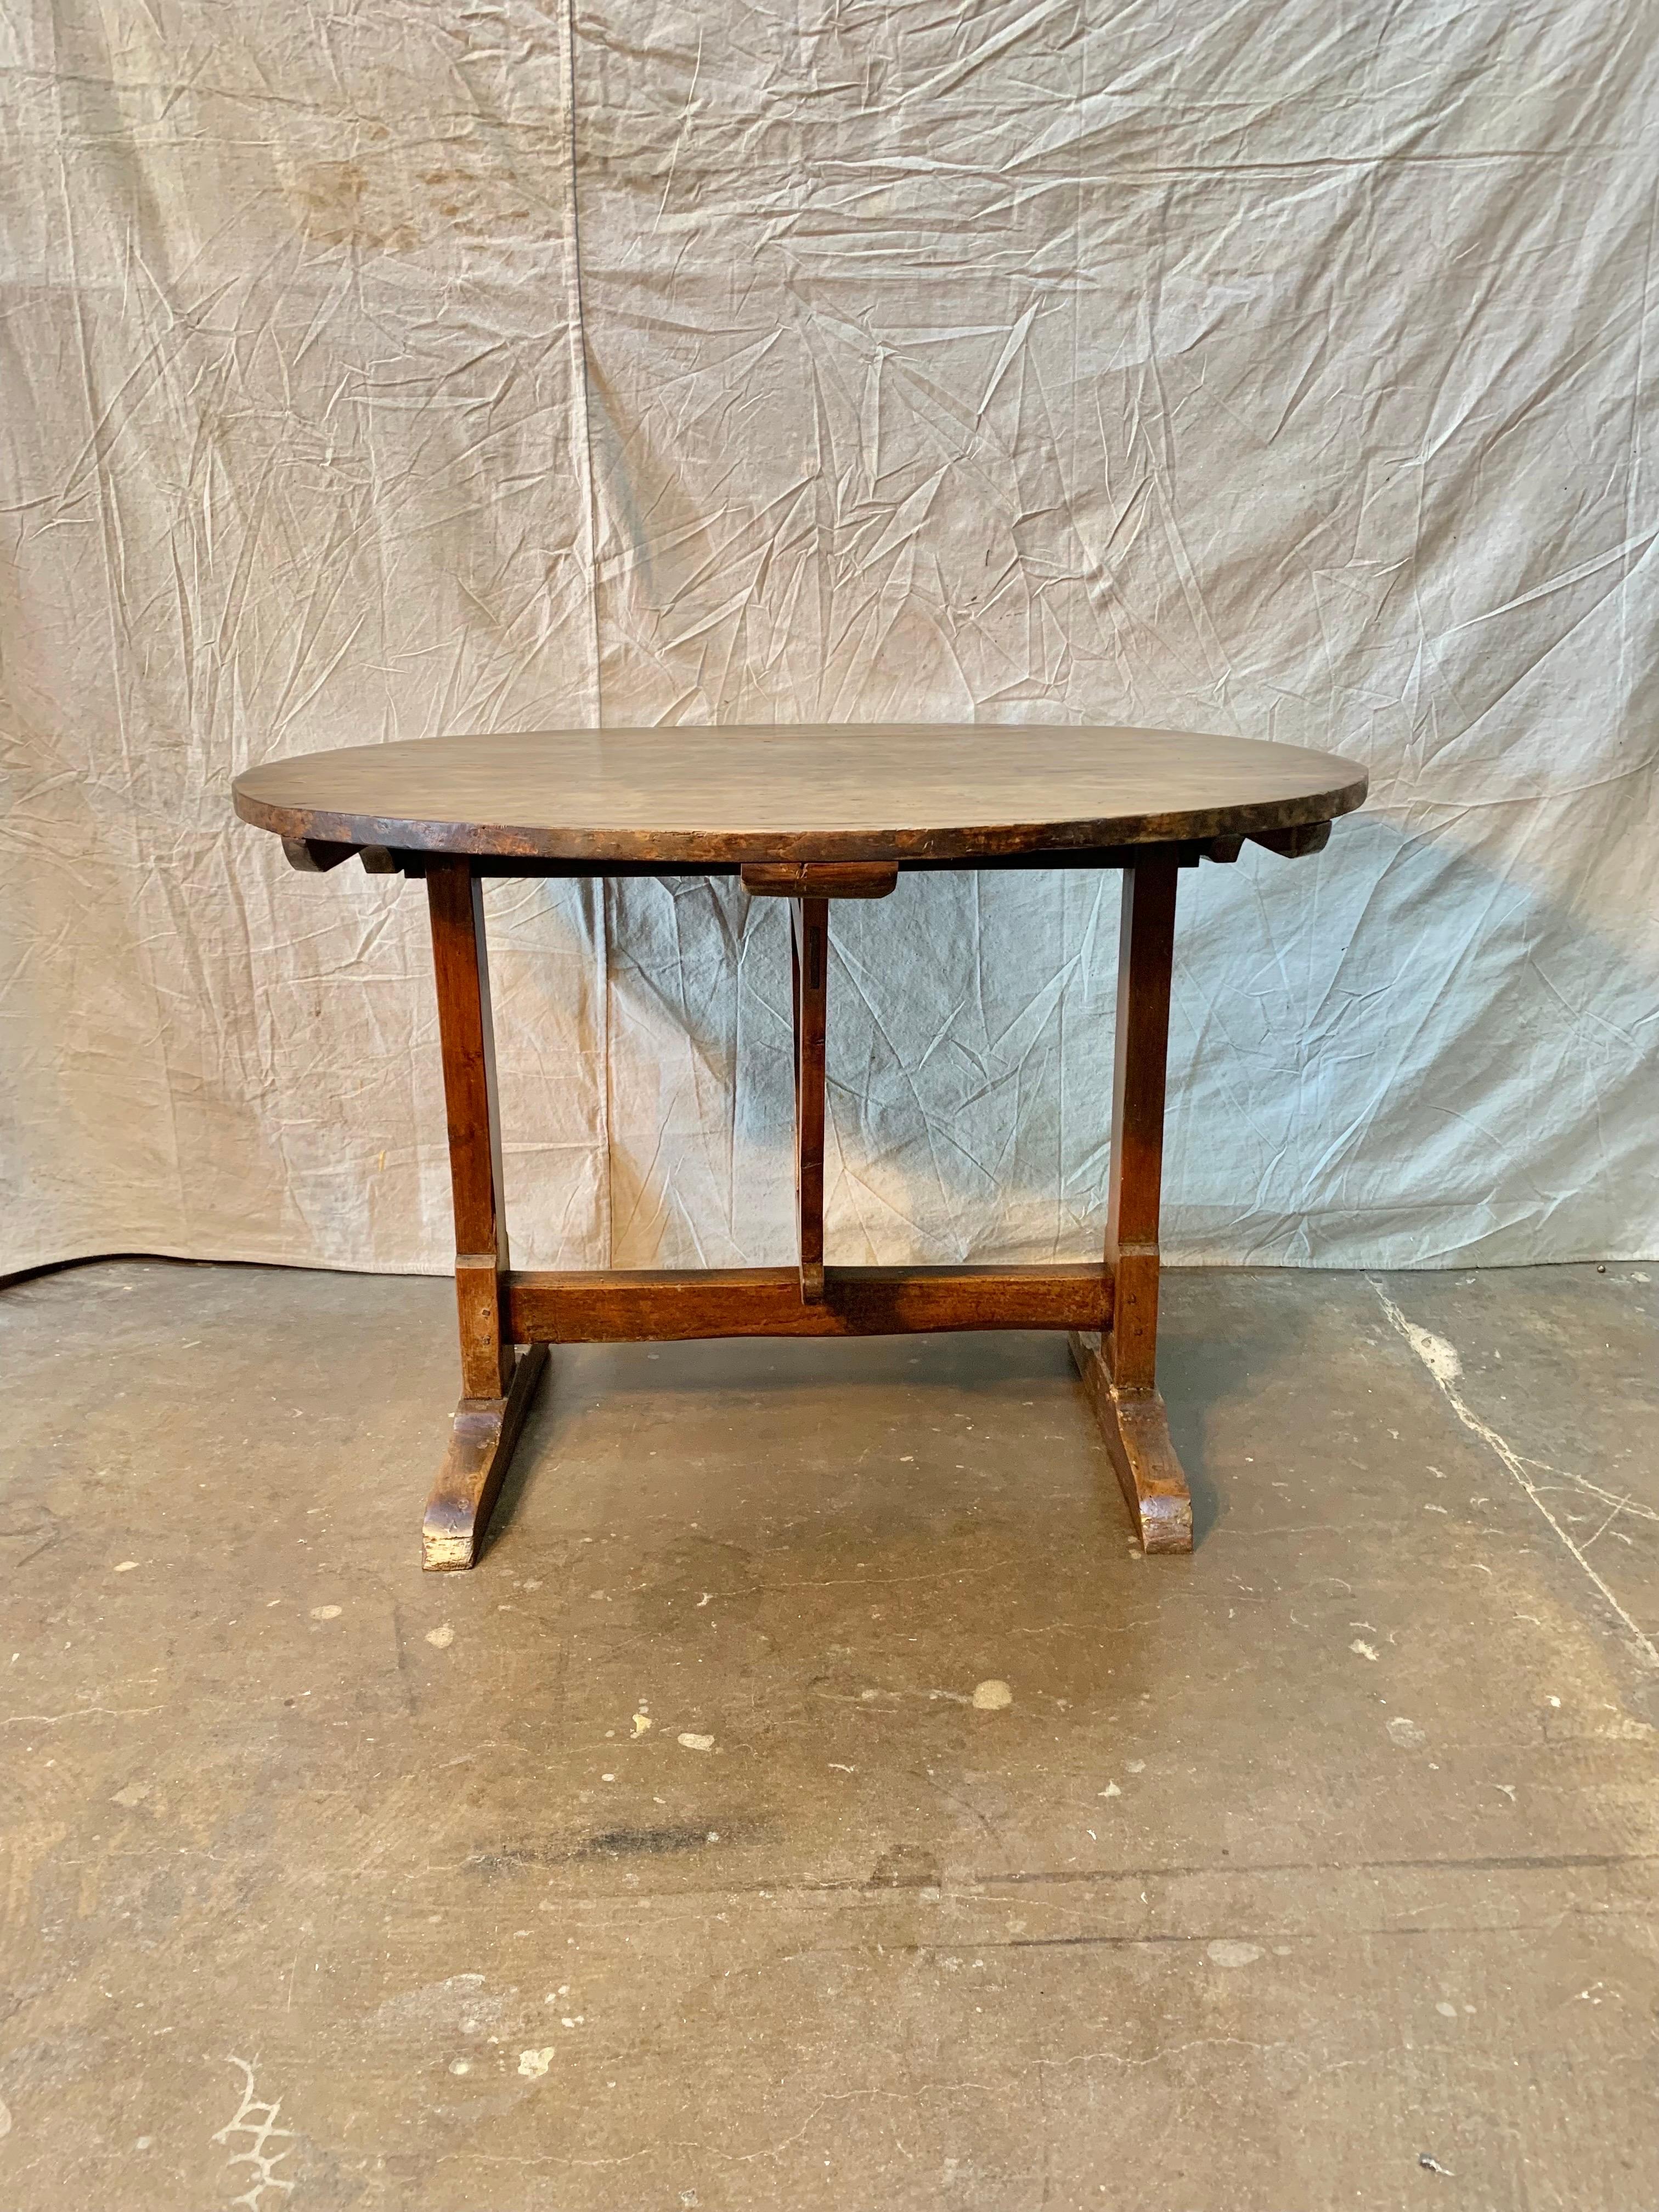 Early 19th Century French Walnut Wine Tasting Table, also known as a vendage or vigeron table, which was once used in the vineyards of France for tasting wine or enjoying a meal. This table would be suitable for use as a center table, small dining